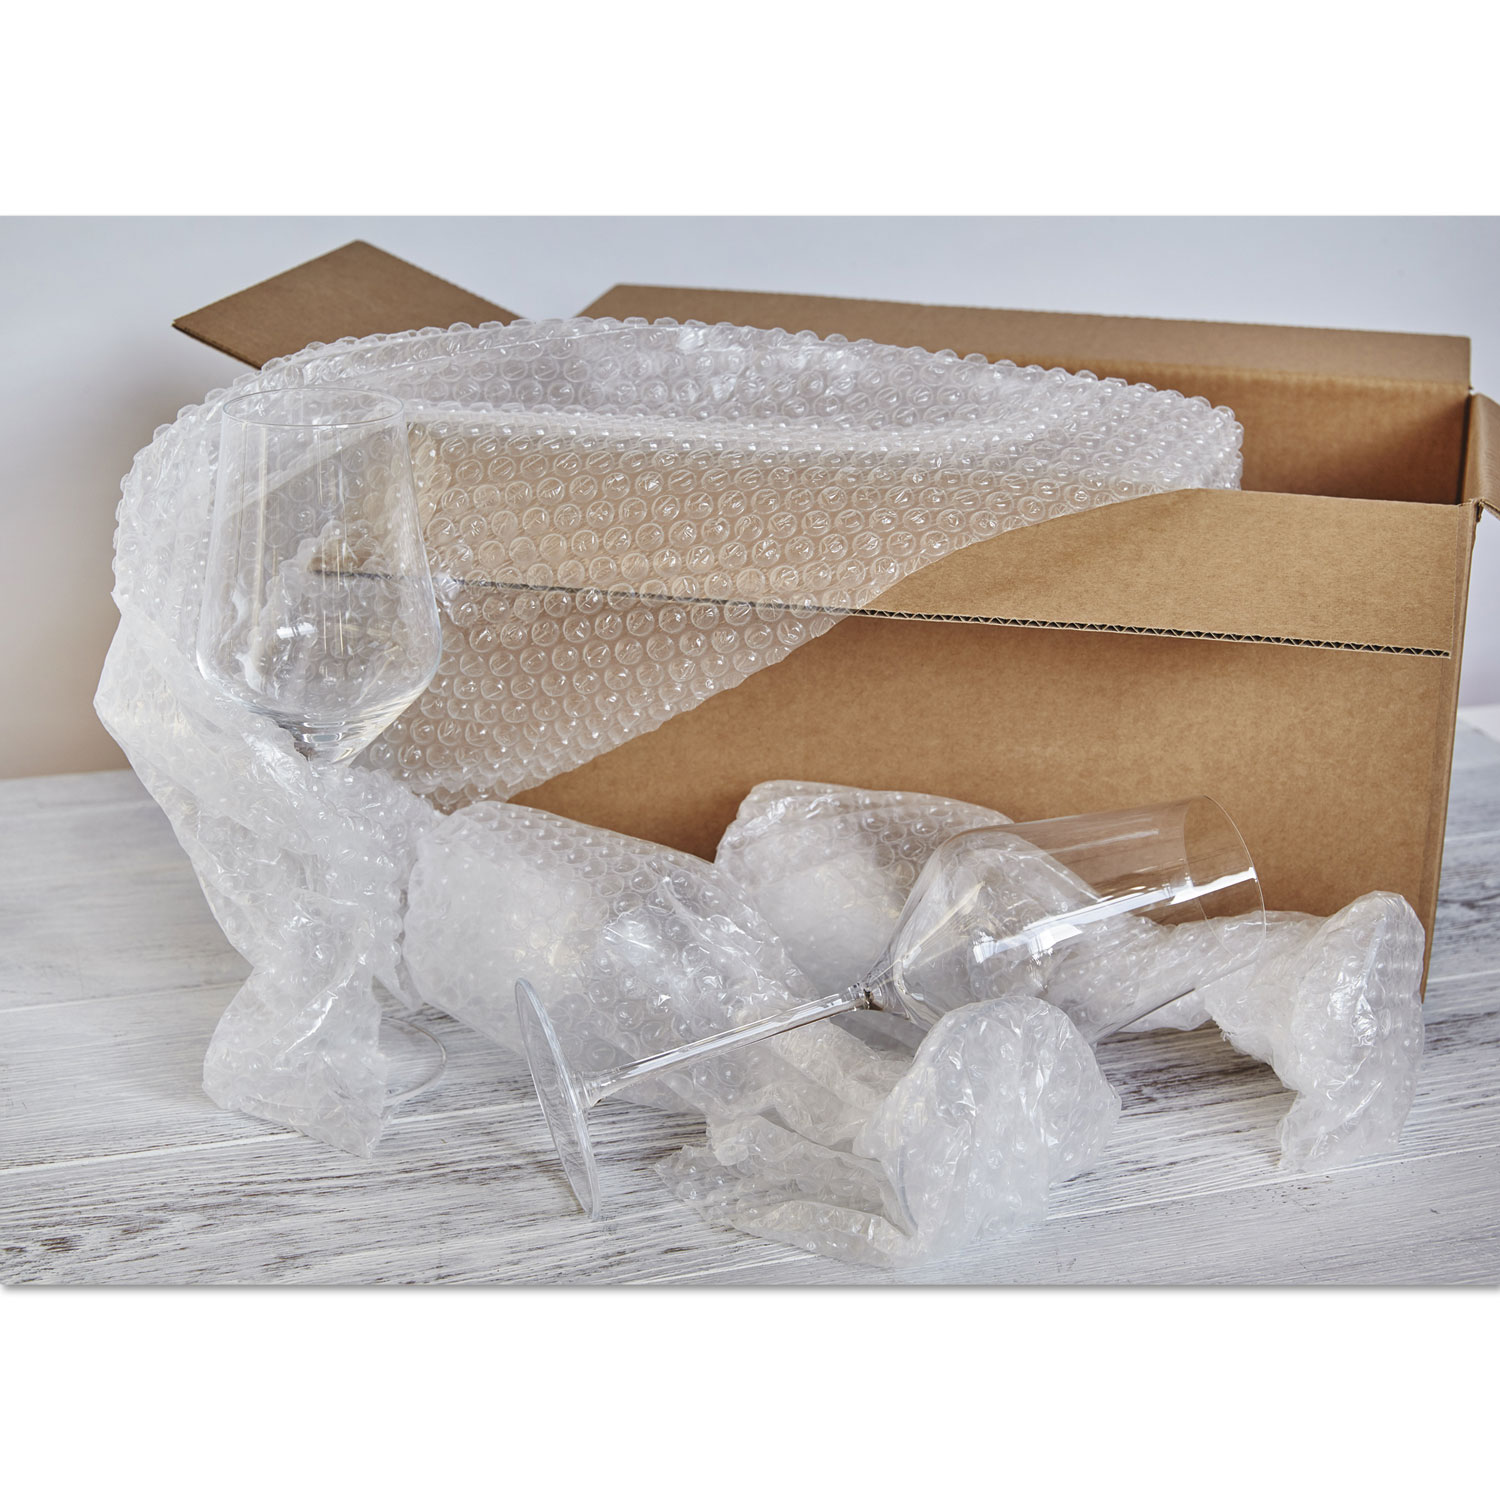 Recycled Bubble Wrap®, Light Weight 5/16 Air Cushioning, 12 x 100ft